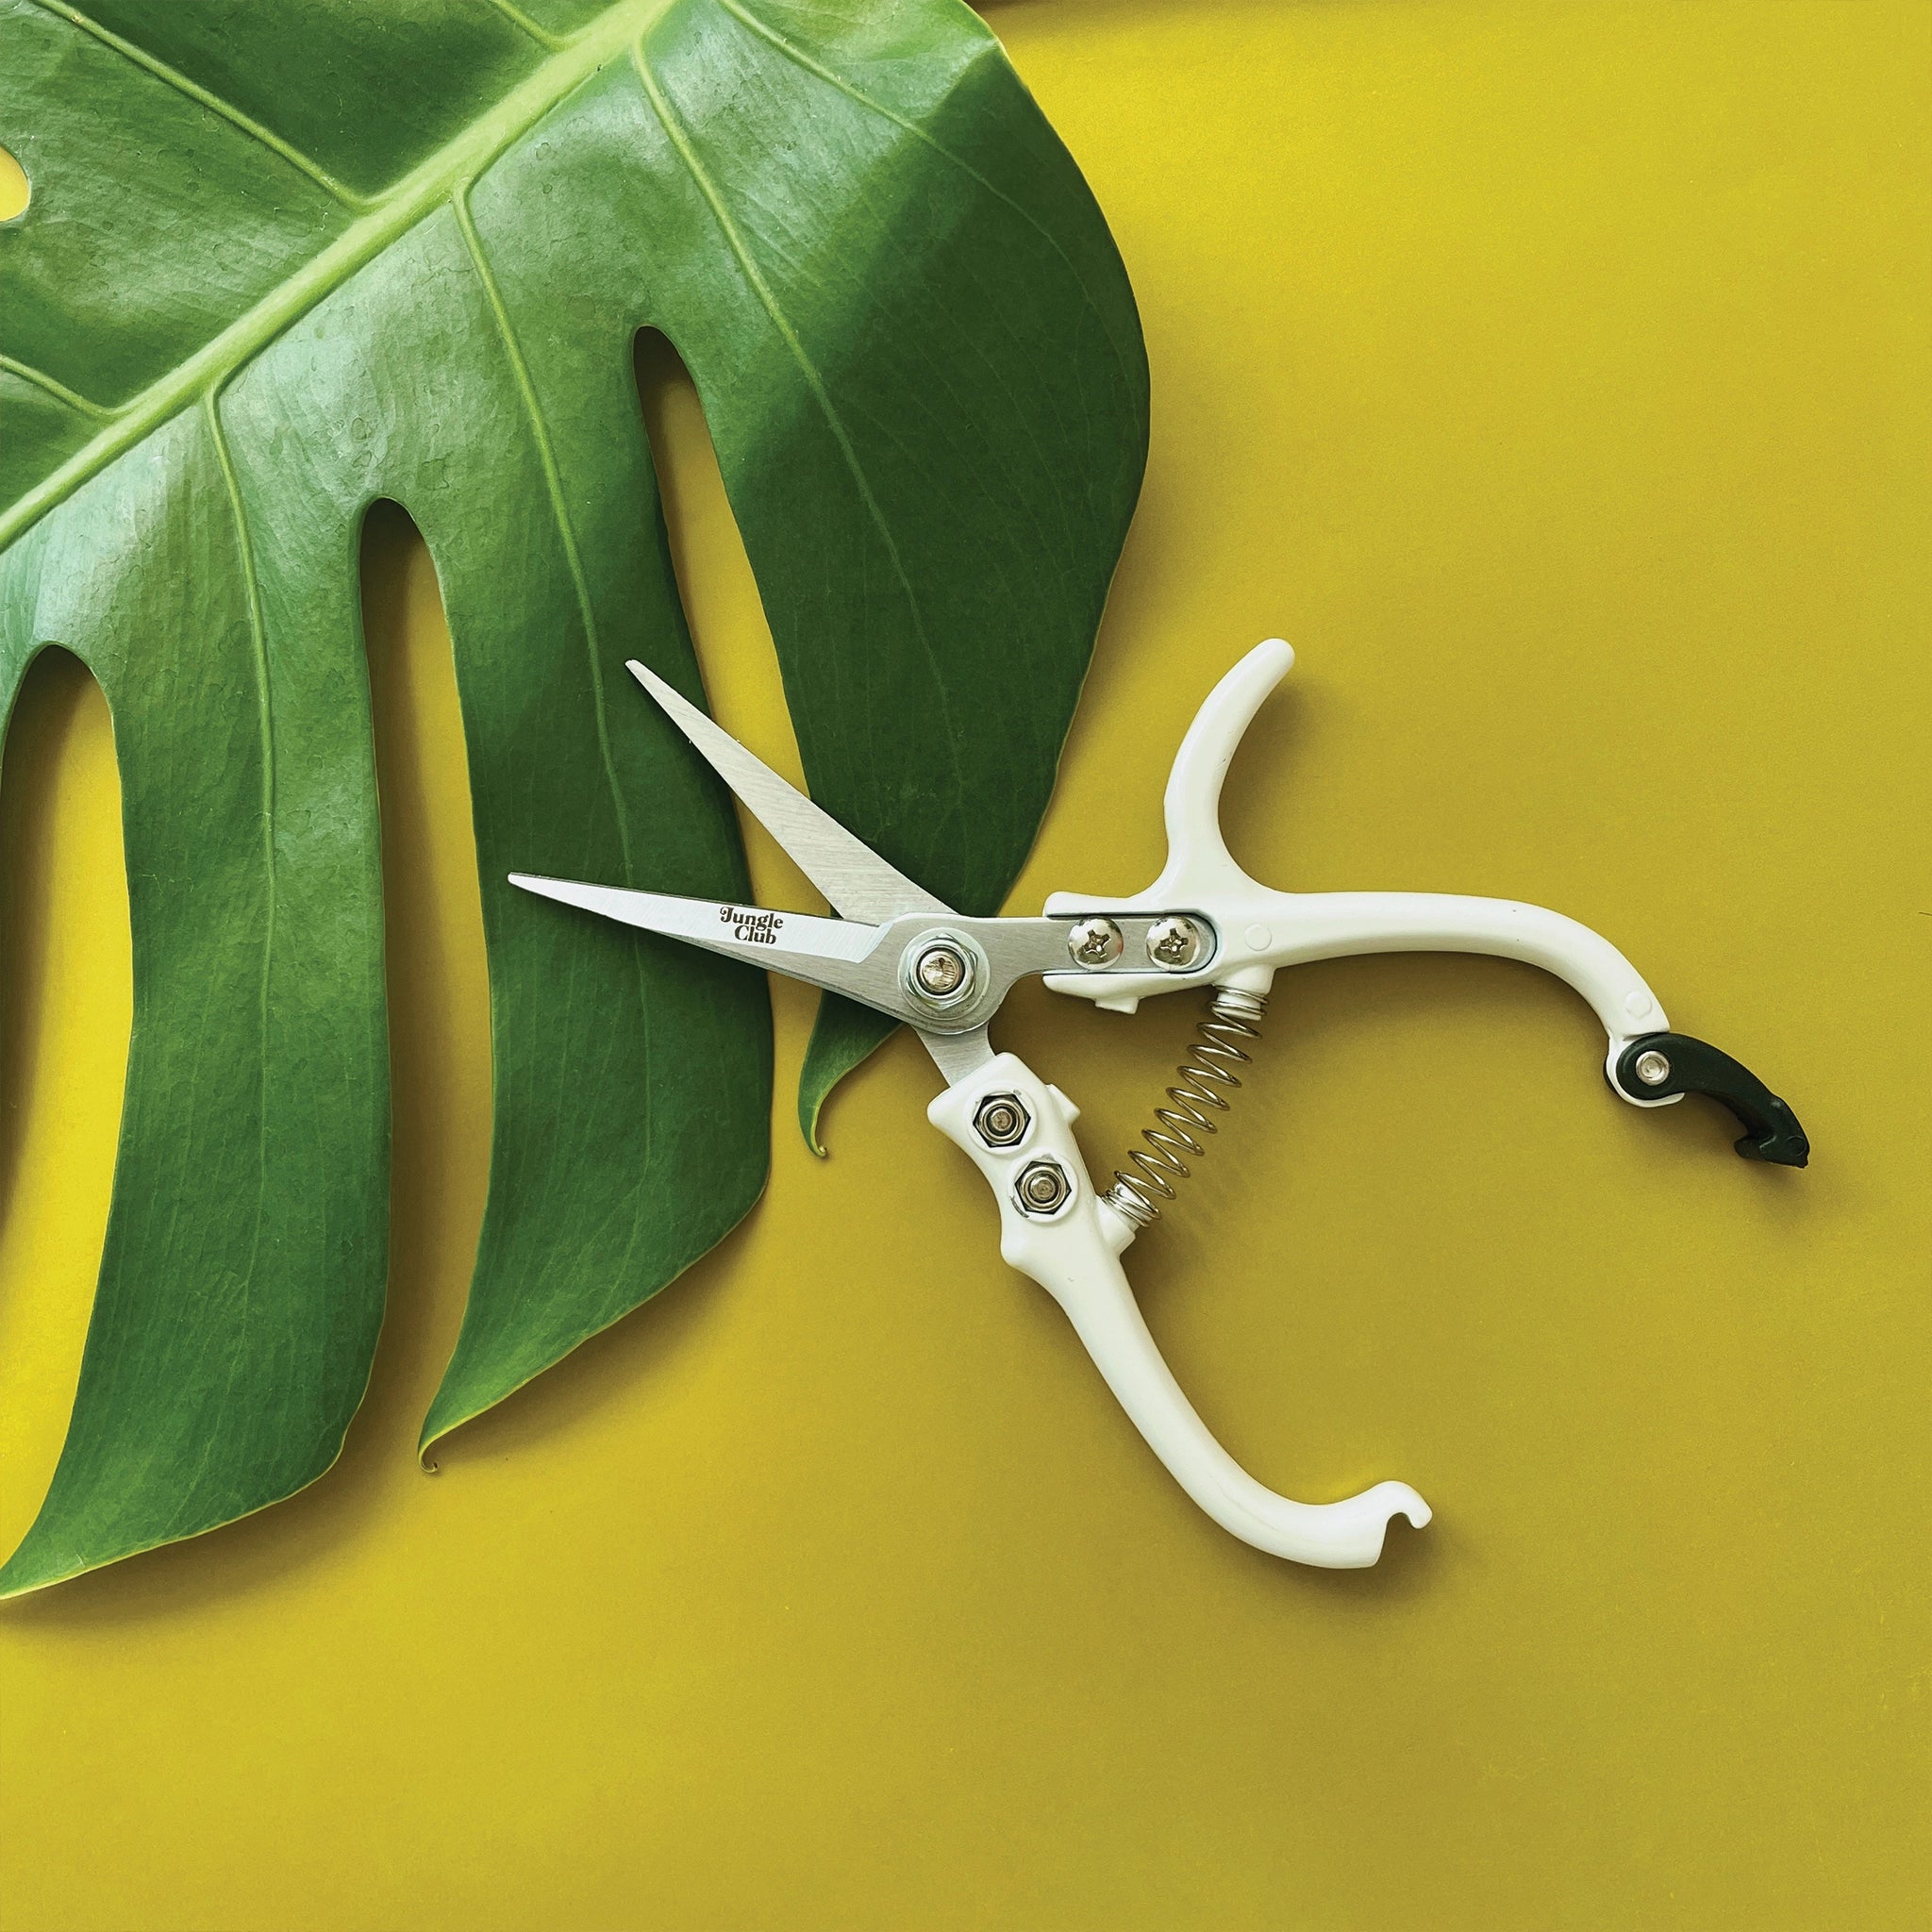 Pair of pruning shears with white handles and metal blades. The outer blade reads 'jungle club' in small, playful lettering. The pruning shears have a black clasp at the top of the handles to secure them closed.